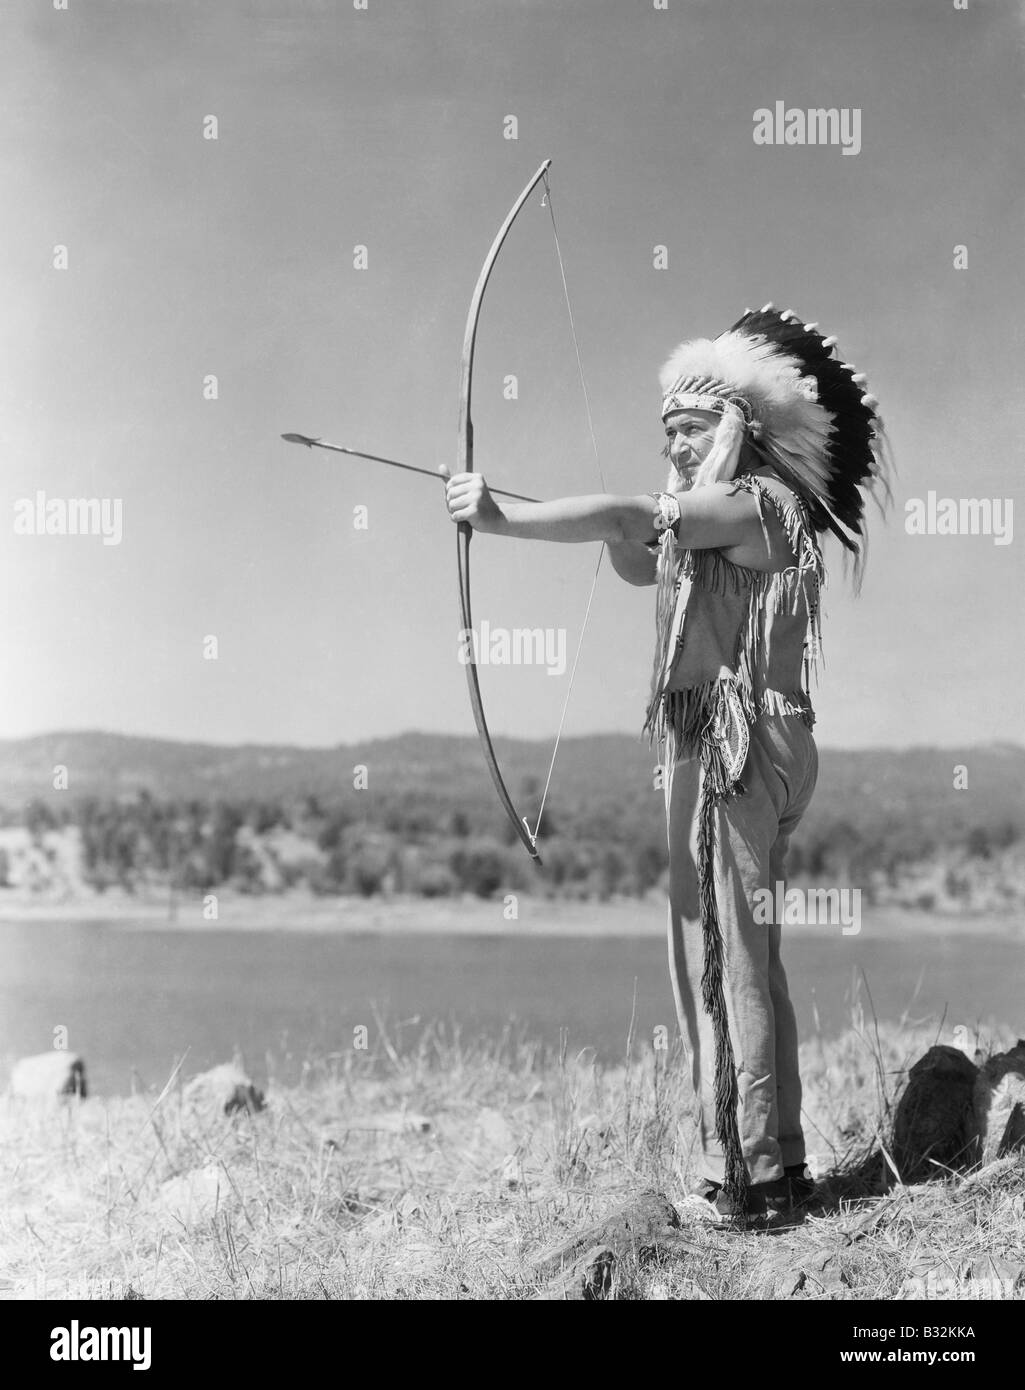 Man shooting with bow and arrow Stock Photo